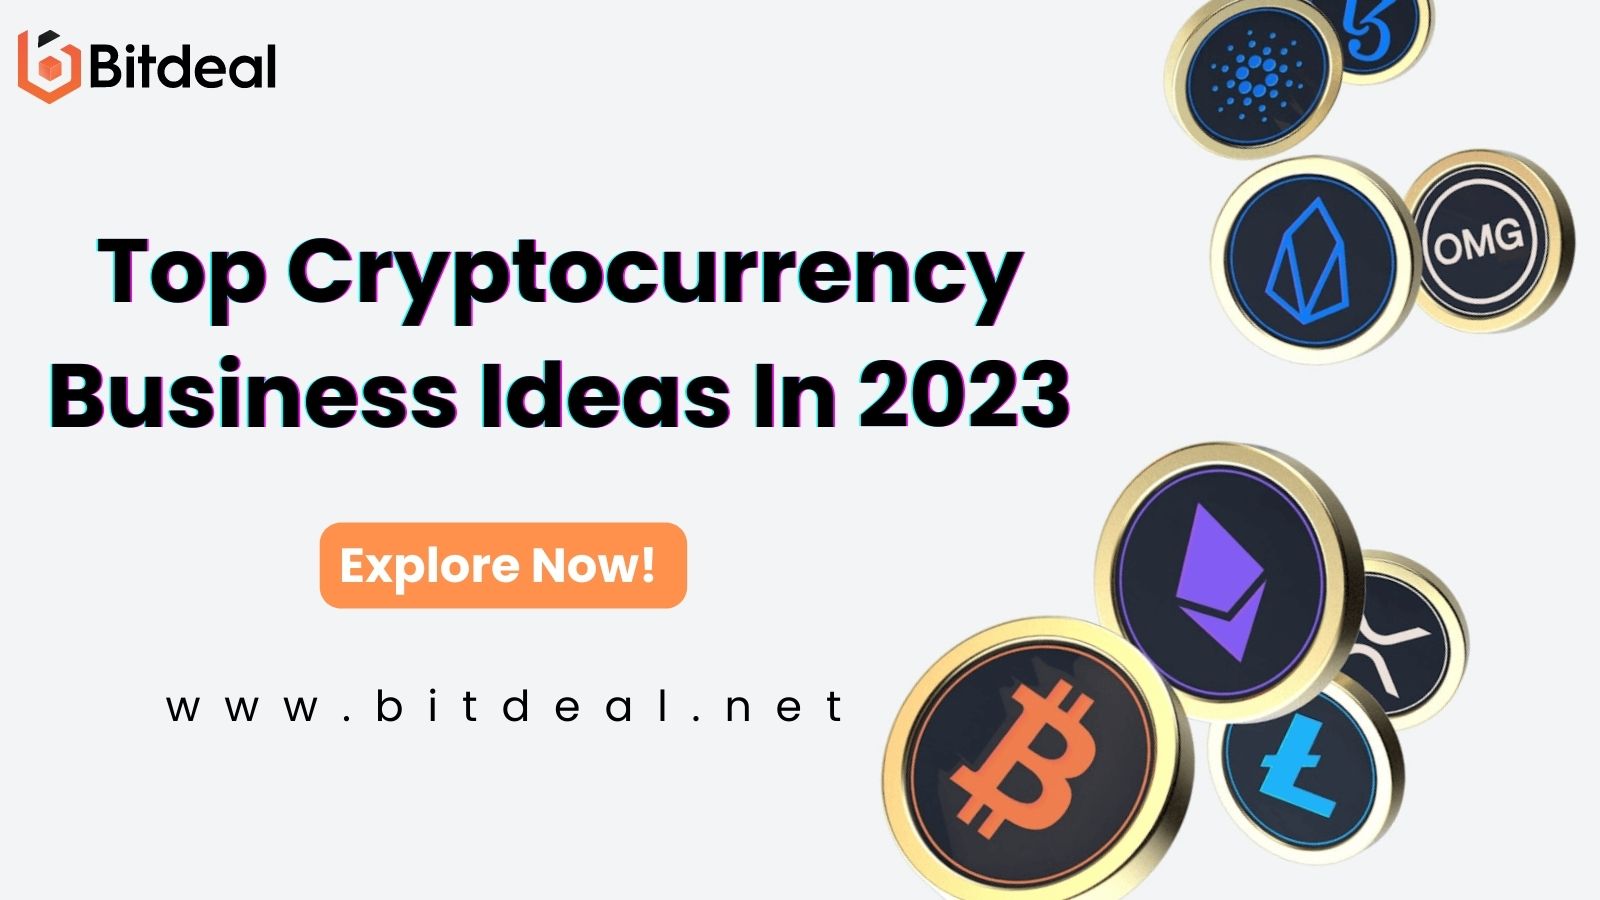 Top Cryptocurrency Business Ideas In 2023